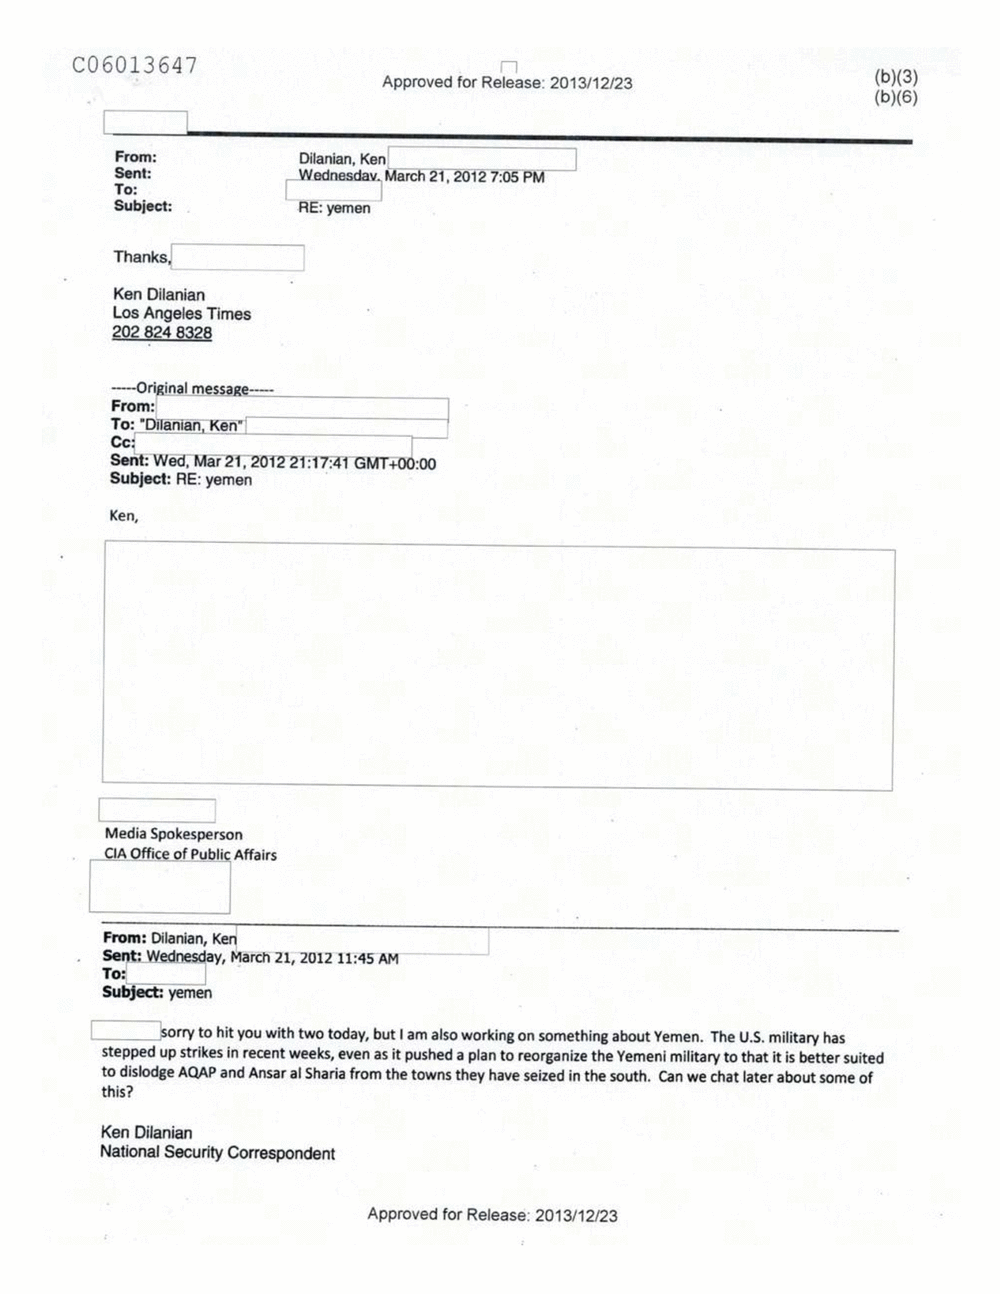 Page 489 from Email Correspondence Between Reporters and CIA Flacks